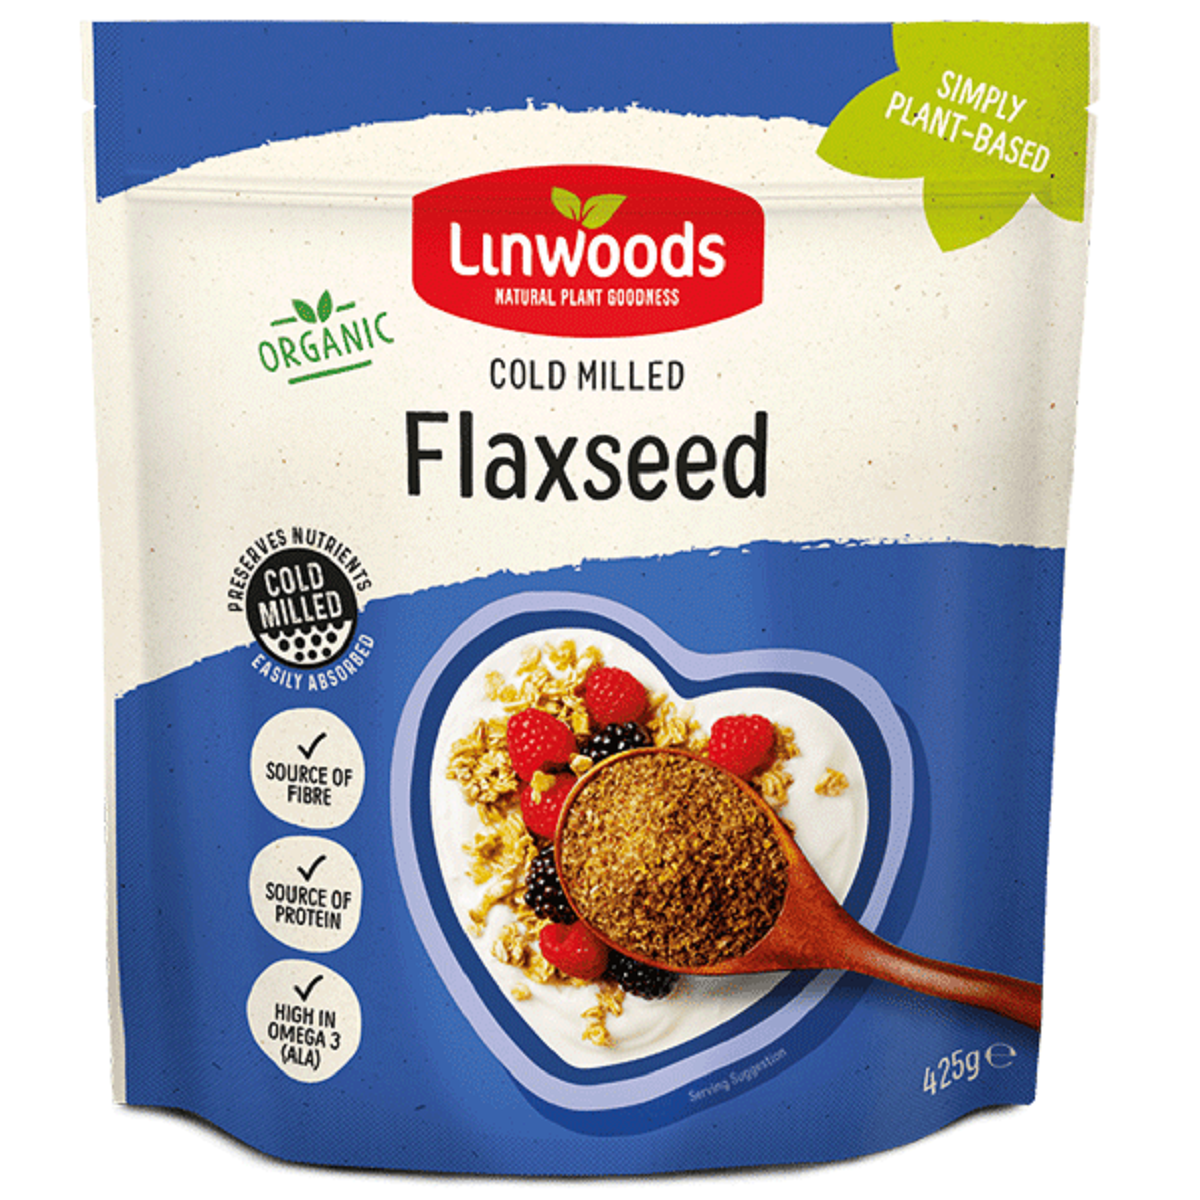 Linwoods Cold Milled Flaxseed 425g